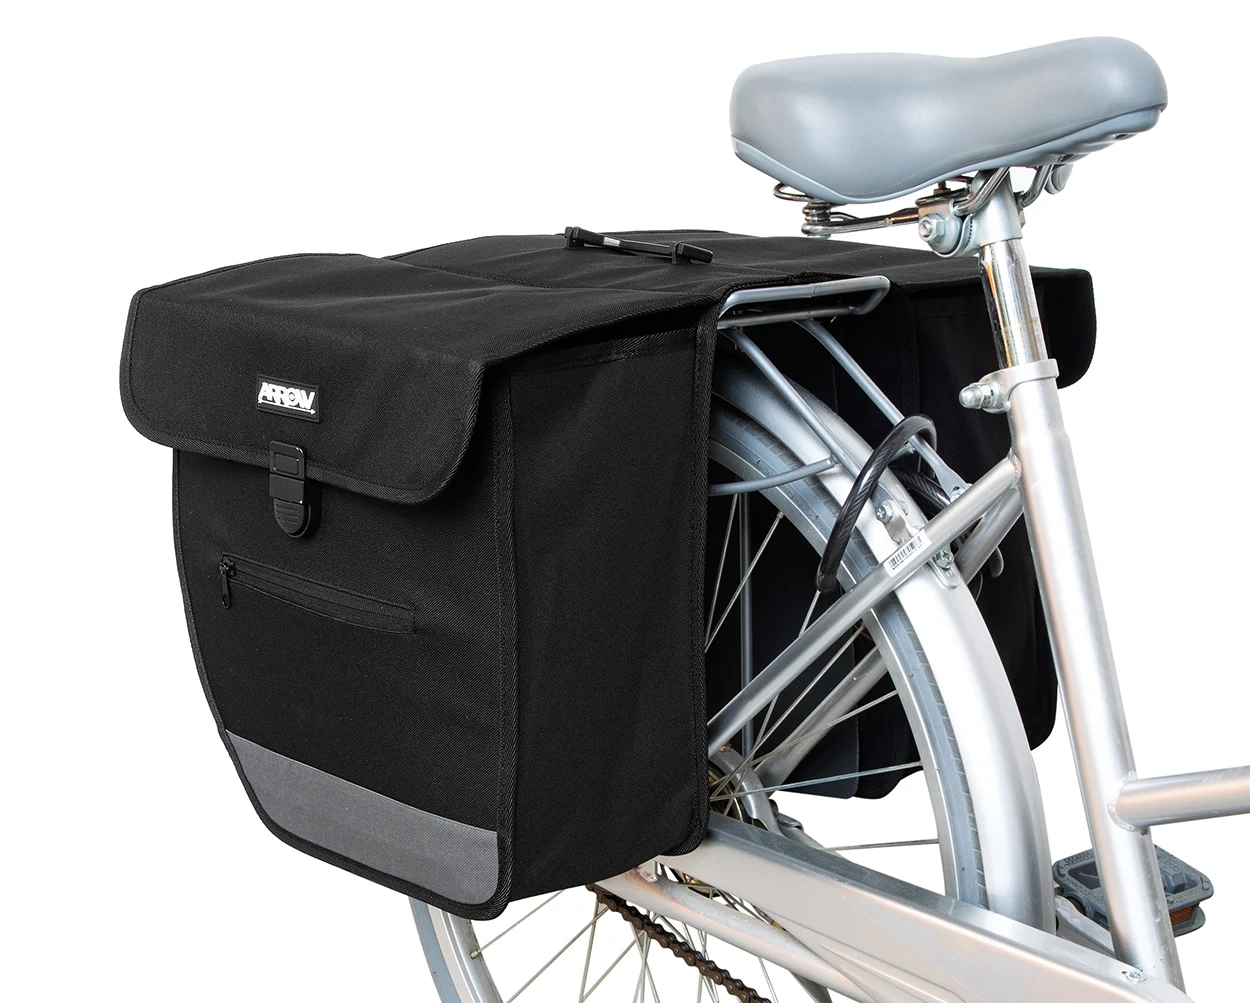 Photography of bicycle luggage bags